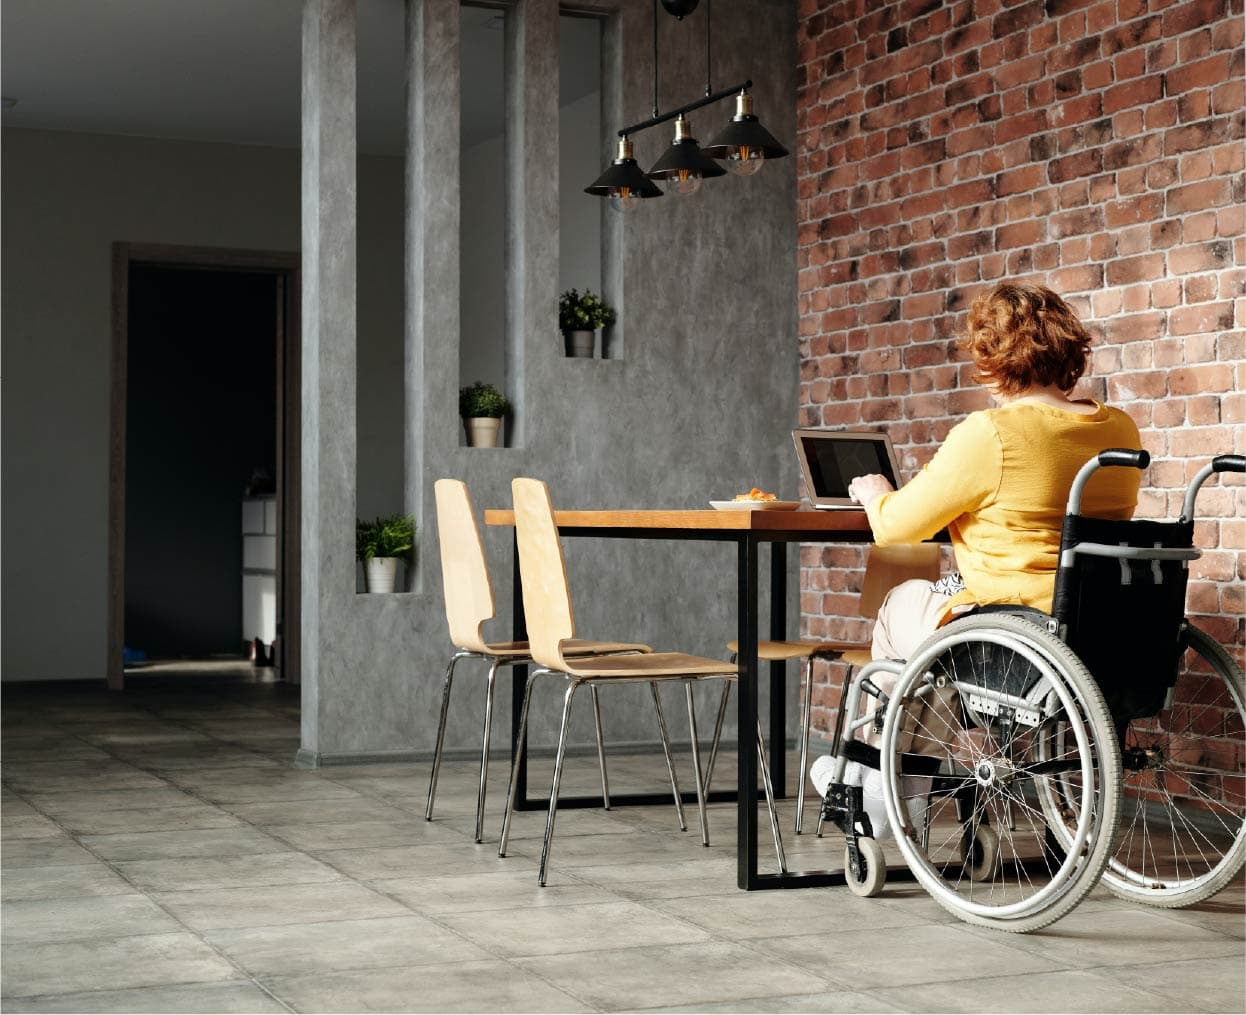 10 ways to make your home more handicap accessible